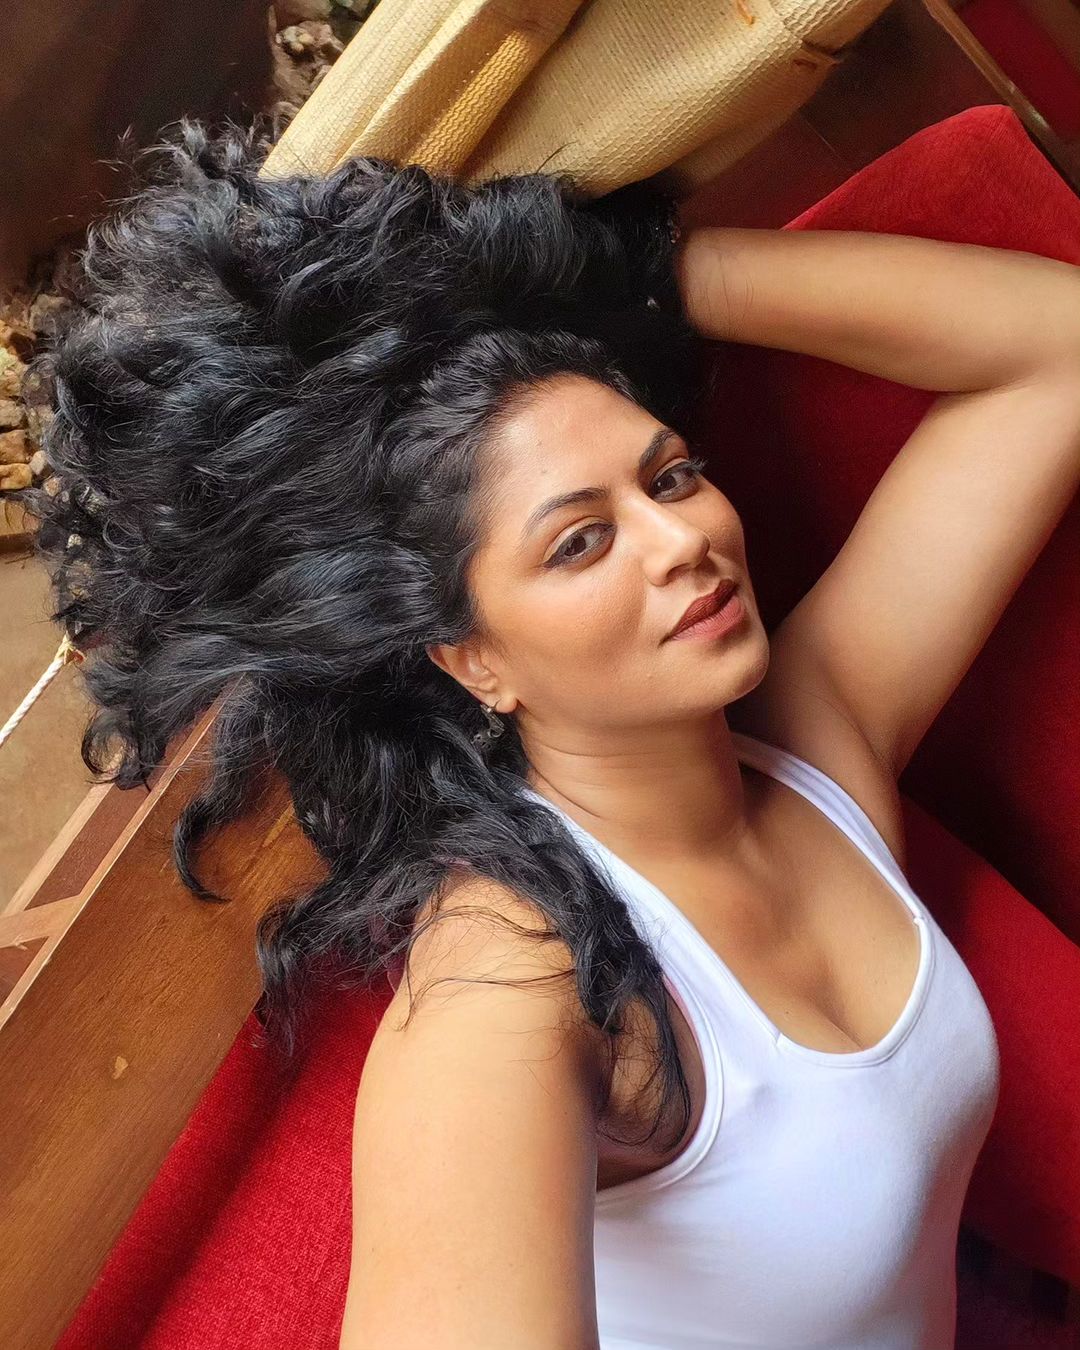 Bigg Boss 14 Fame Kavita Kaushik Dropped A Video To Make Her Fans LOL From Her Devprayag Thrilling Experience! Read on to find out what is funny about her.